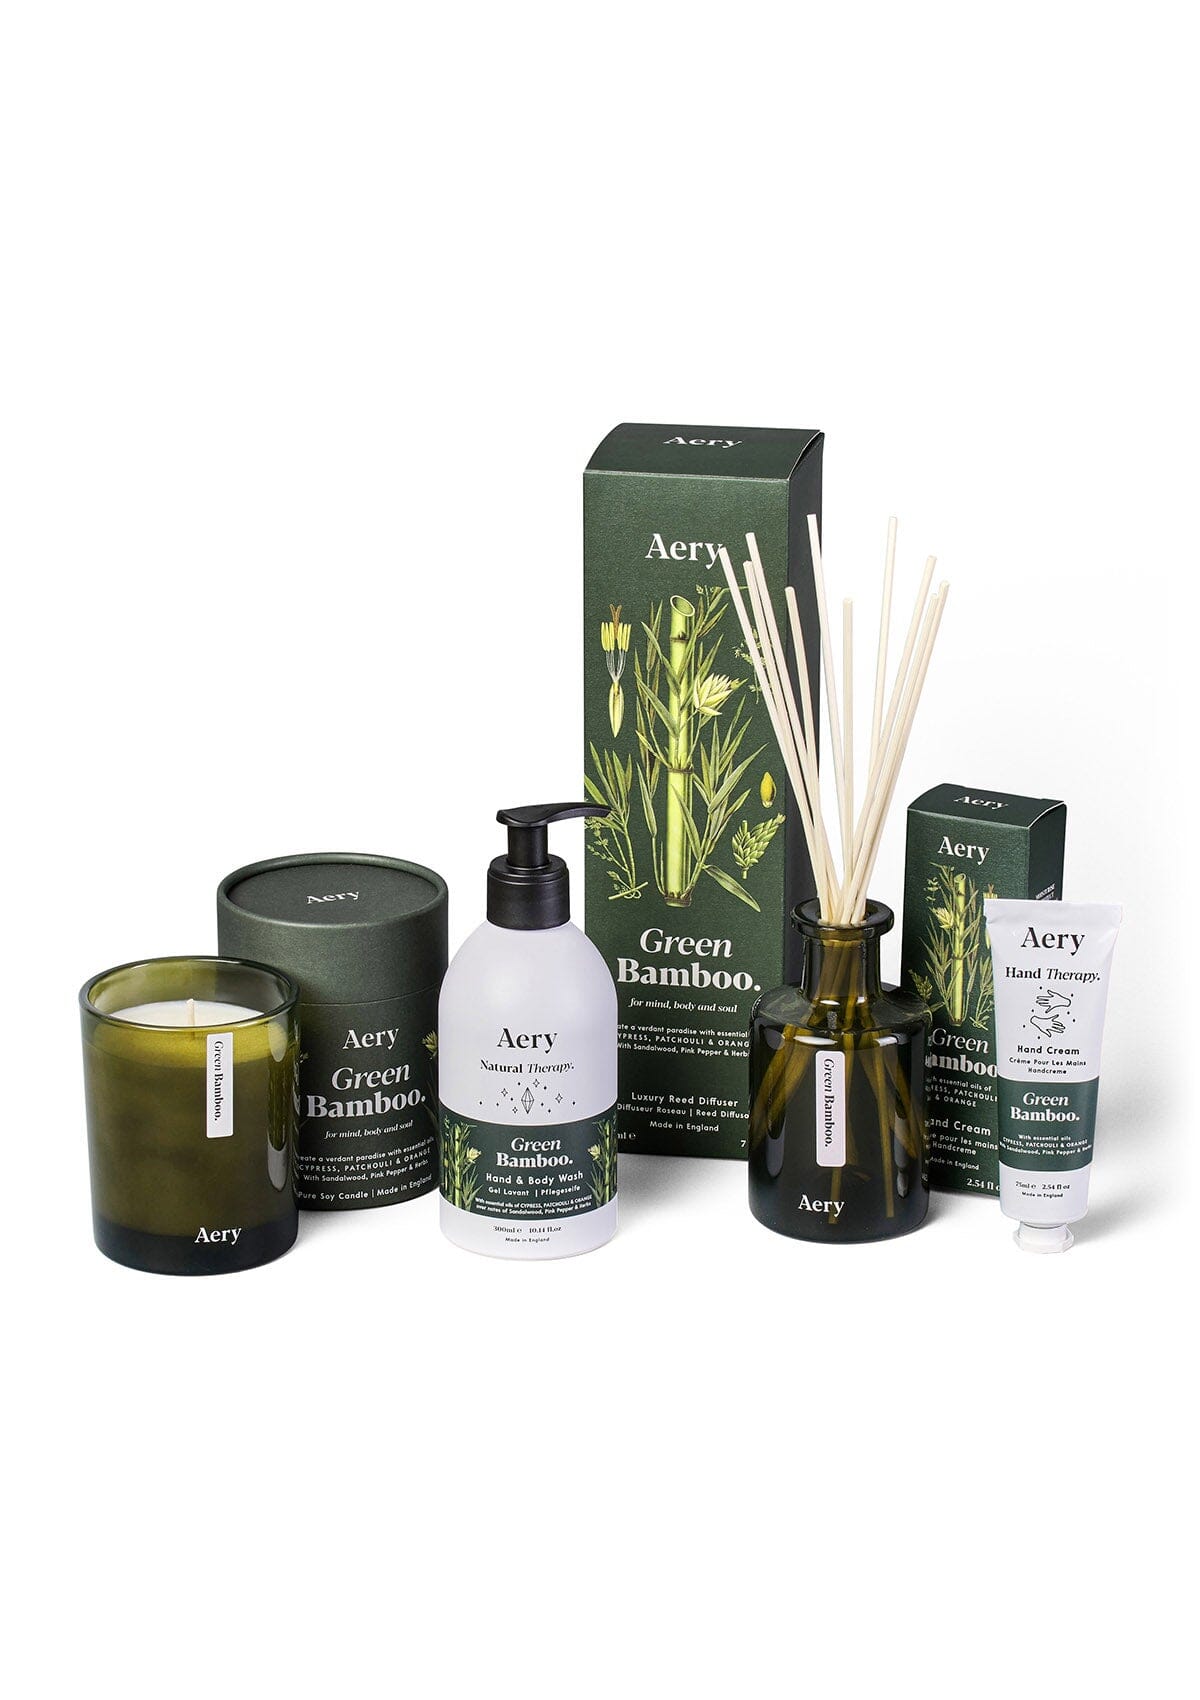 Green Bamboo diffuser, candle, hand cream and hand and body lotion by Aery displayed on white background 